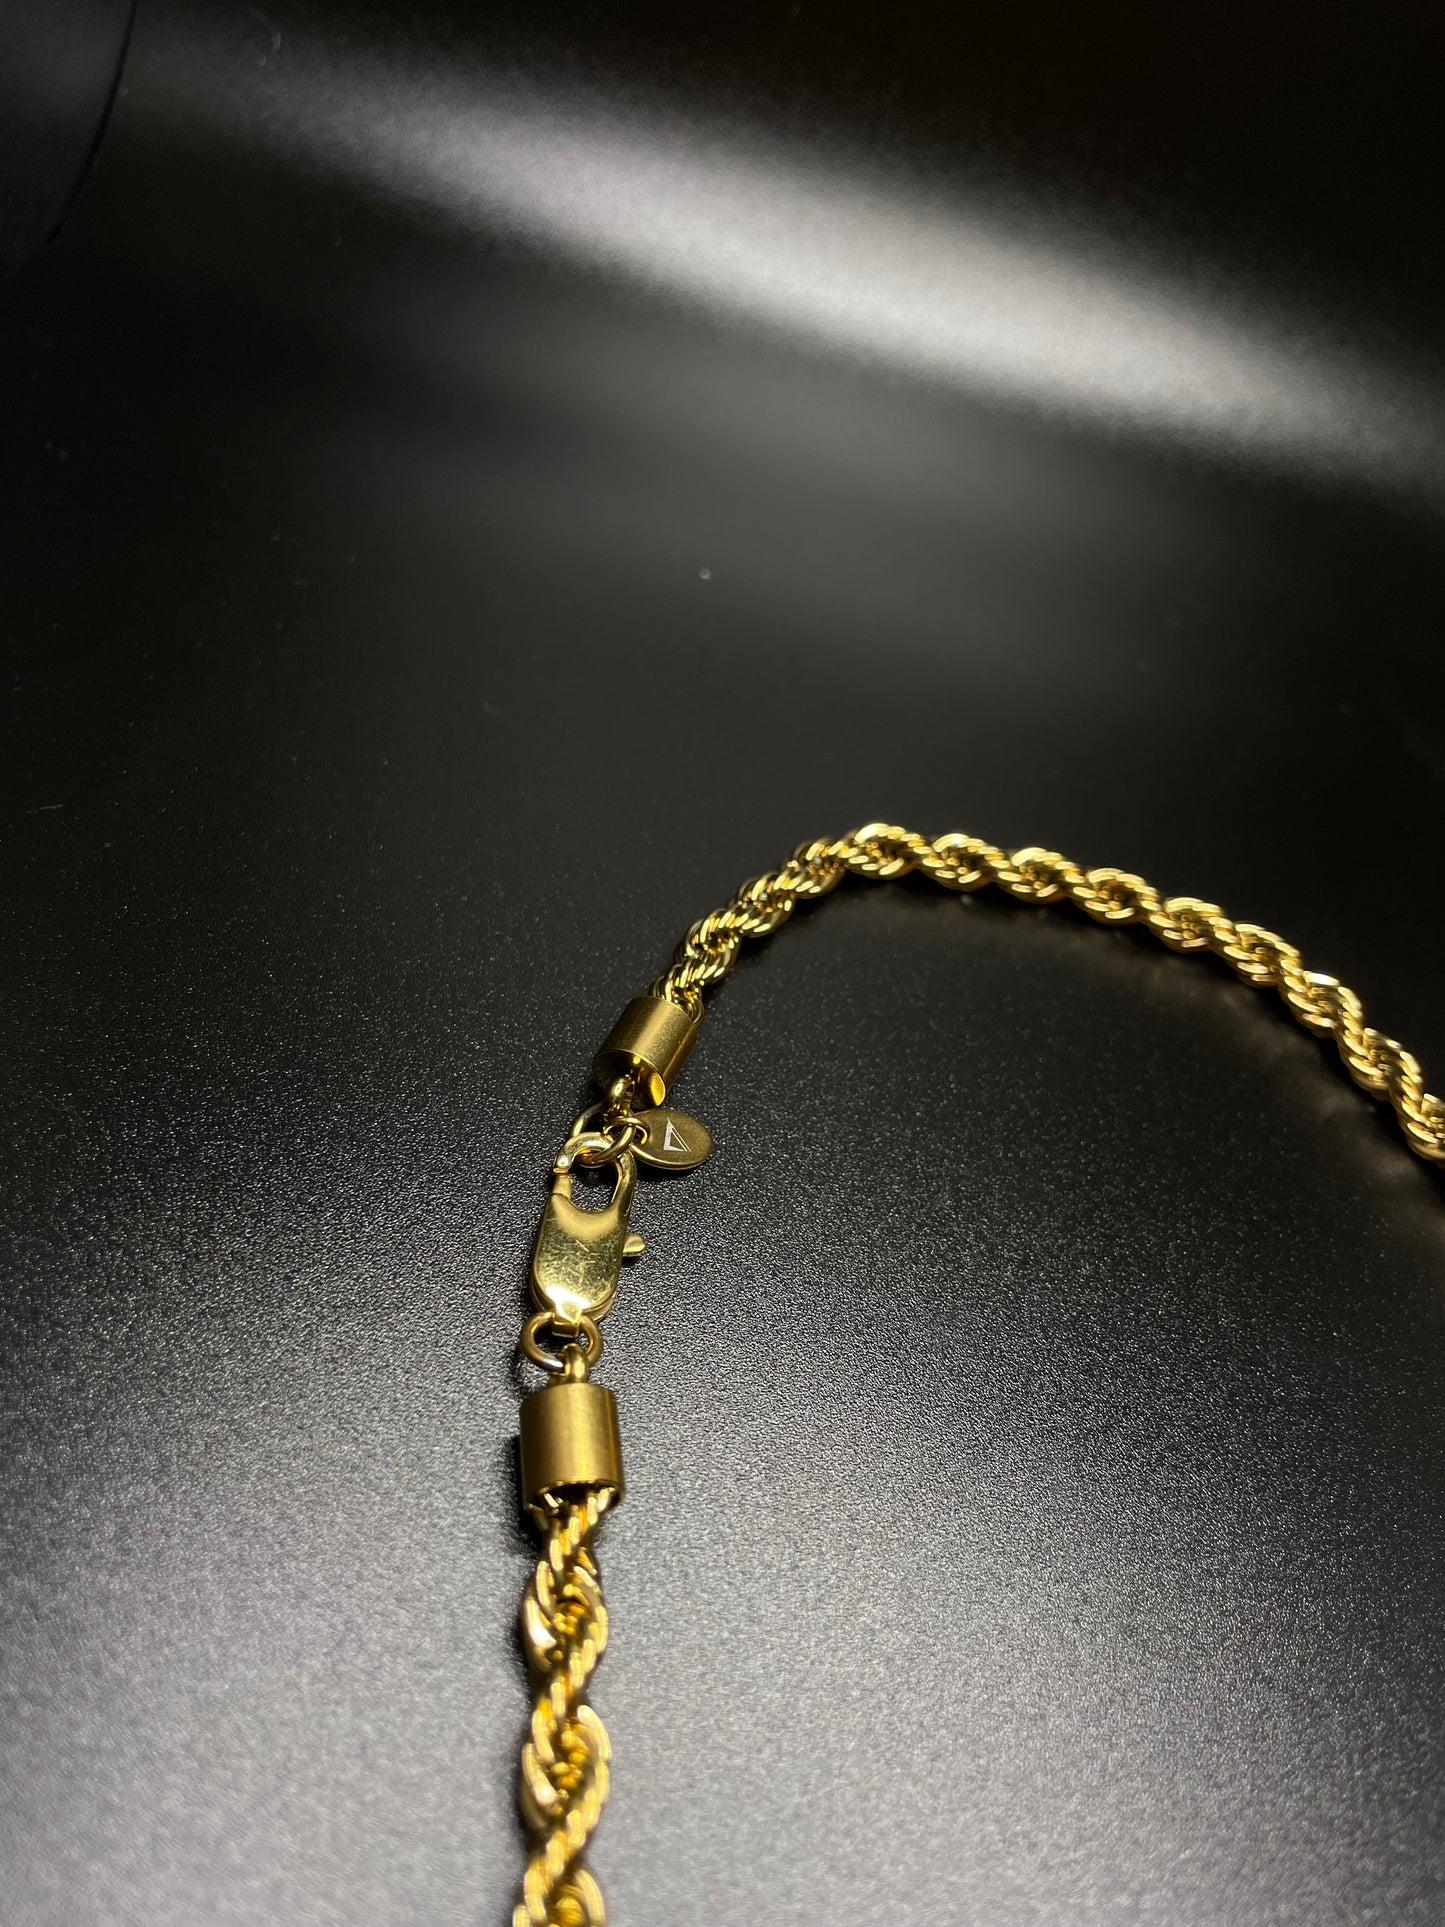 6mm 18k Gold/Silver Rope